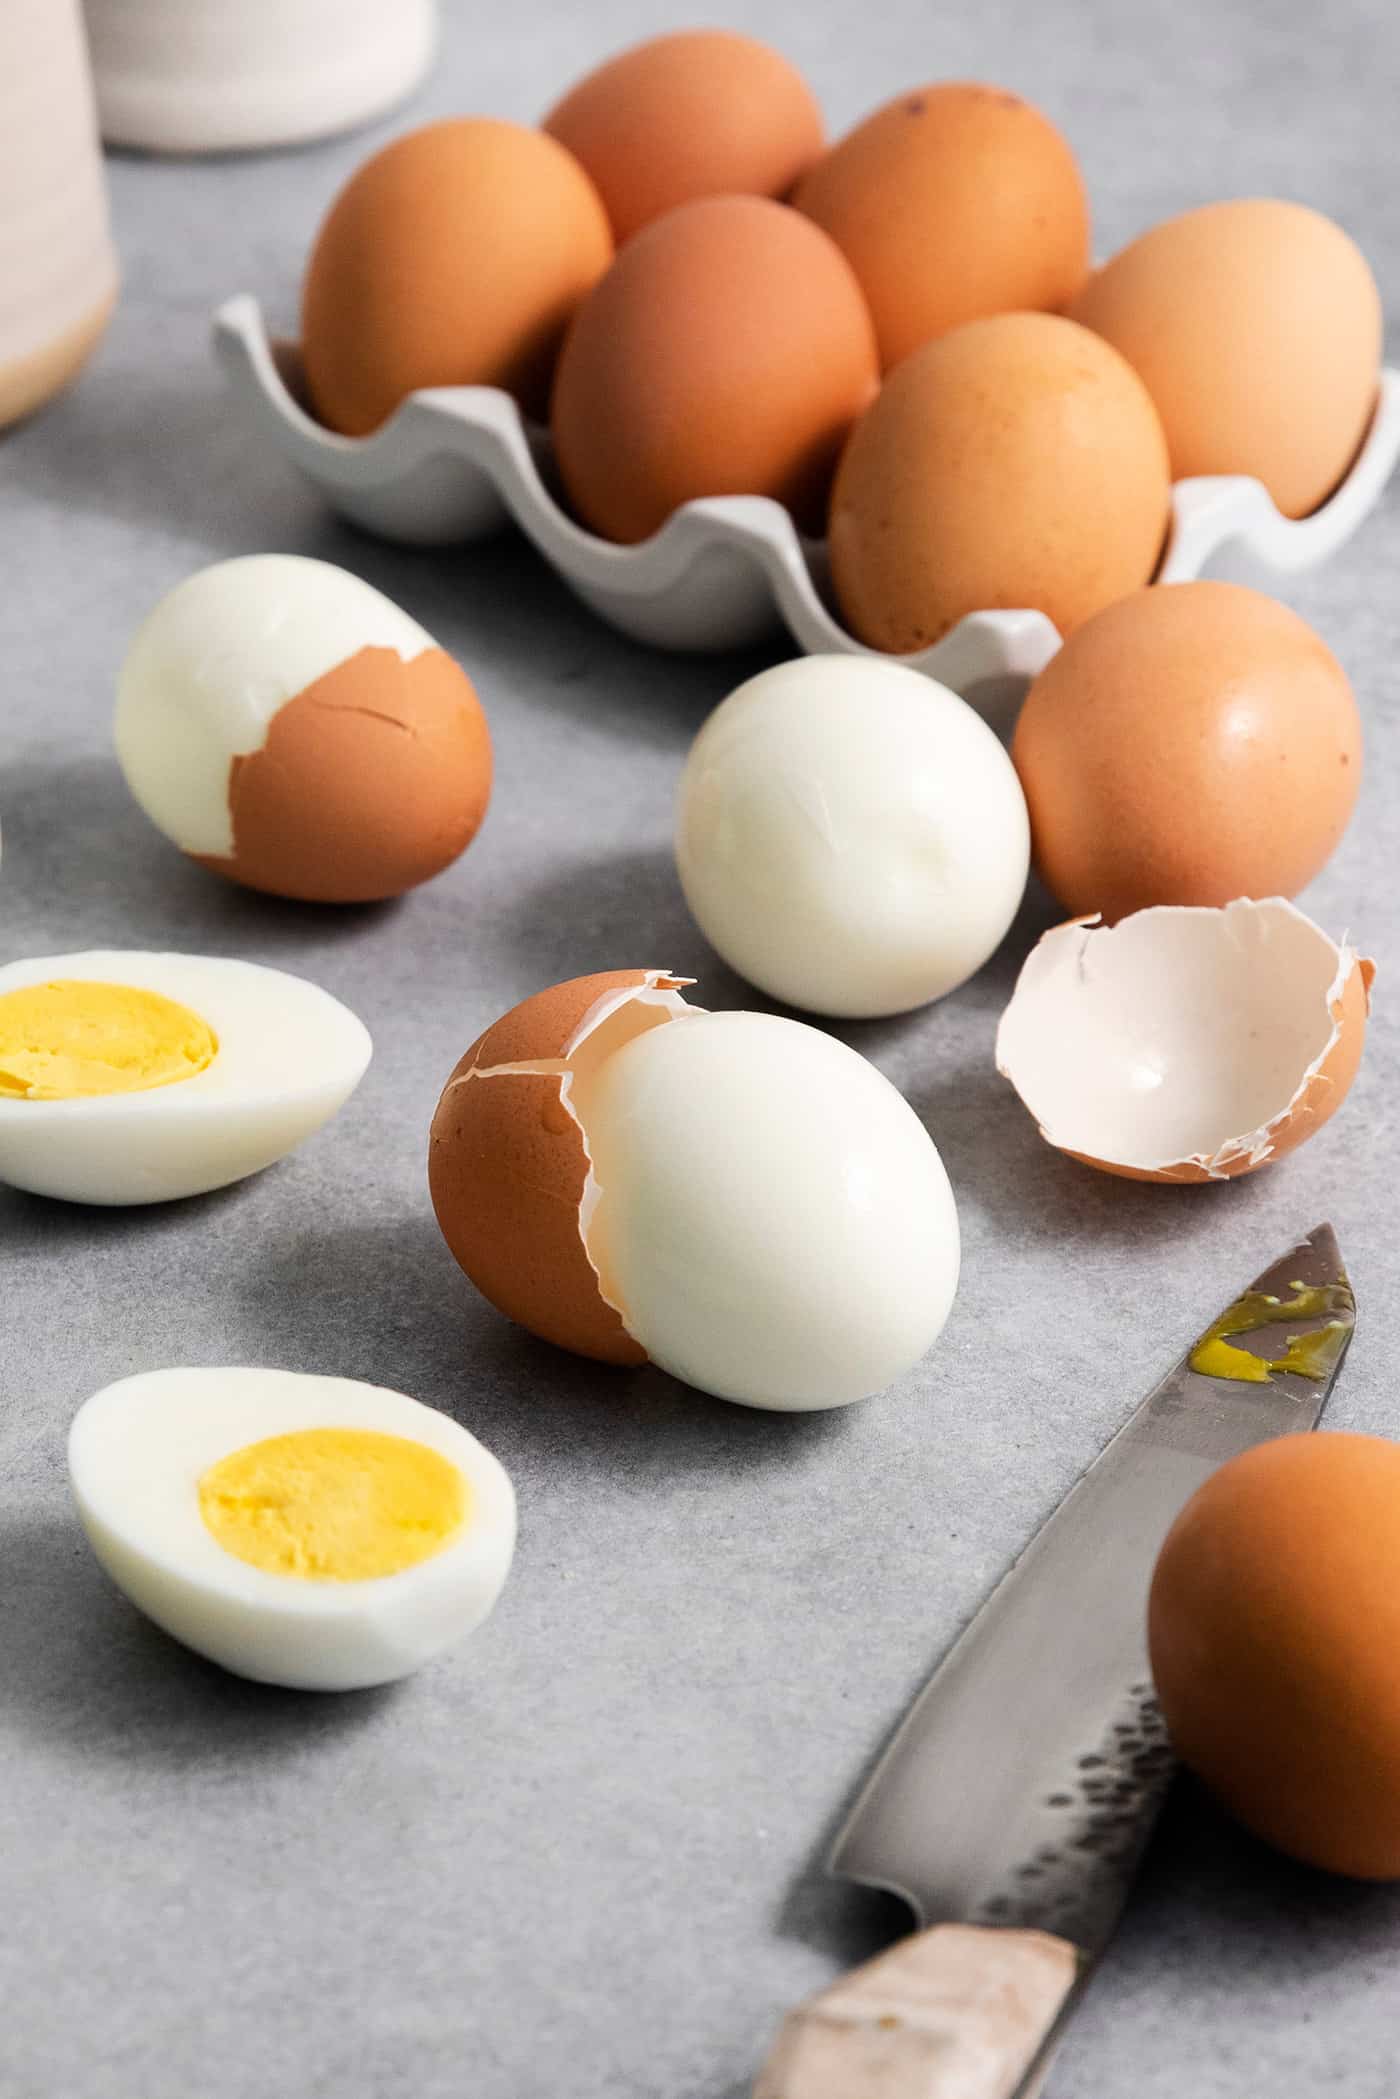 hard boiled eggs, some are peeled and cut in half